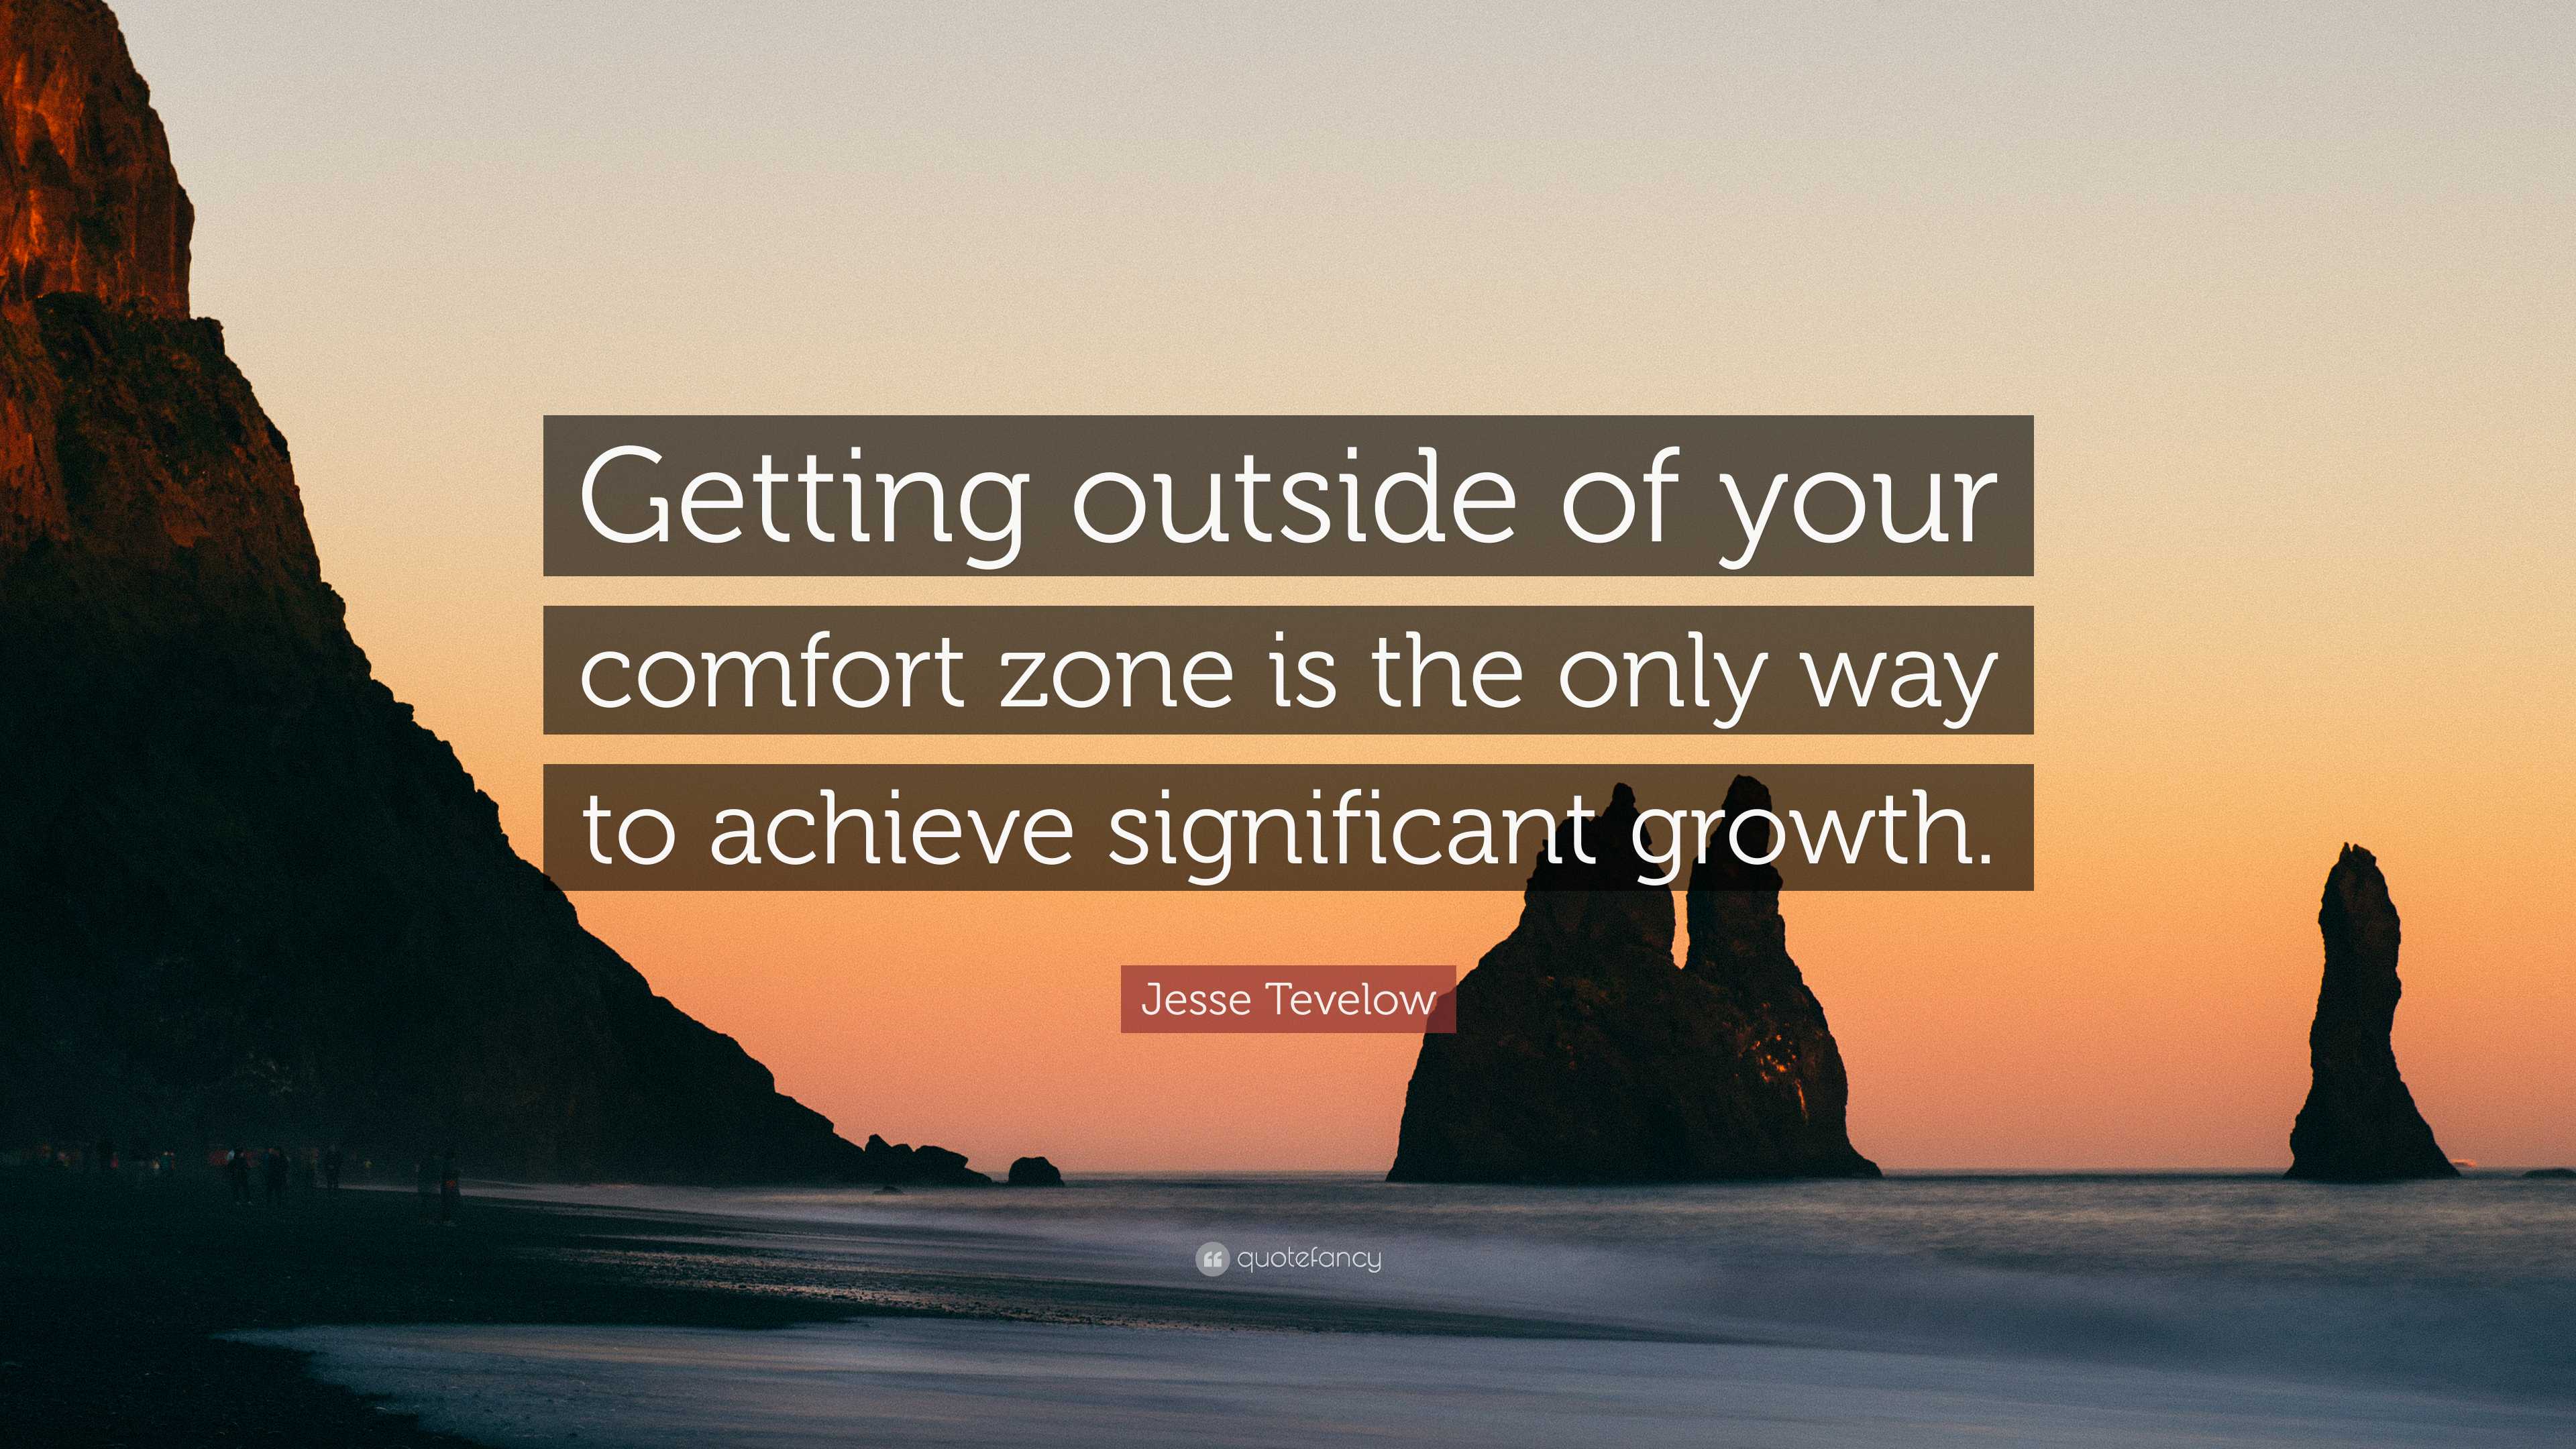 Moving Beyond Your Comfort Zone: A Path to Personal Growth - Ric